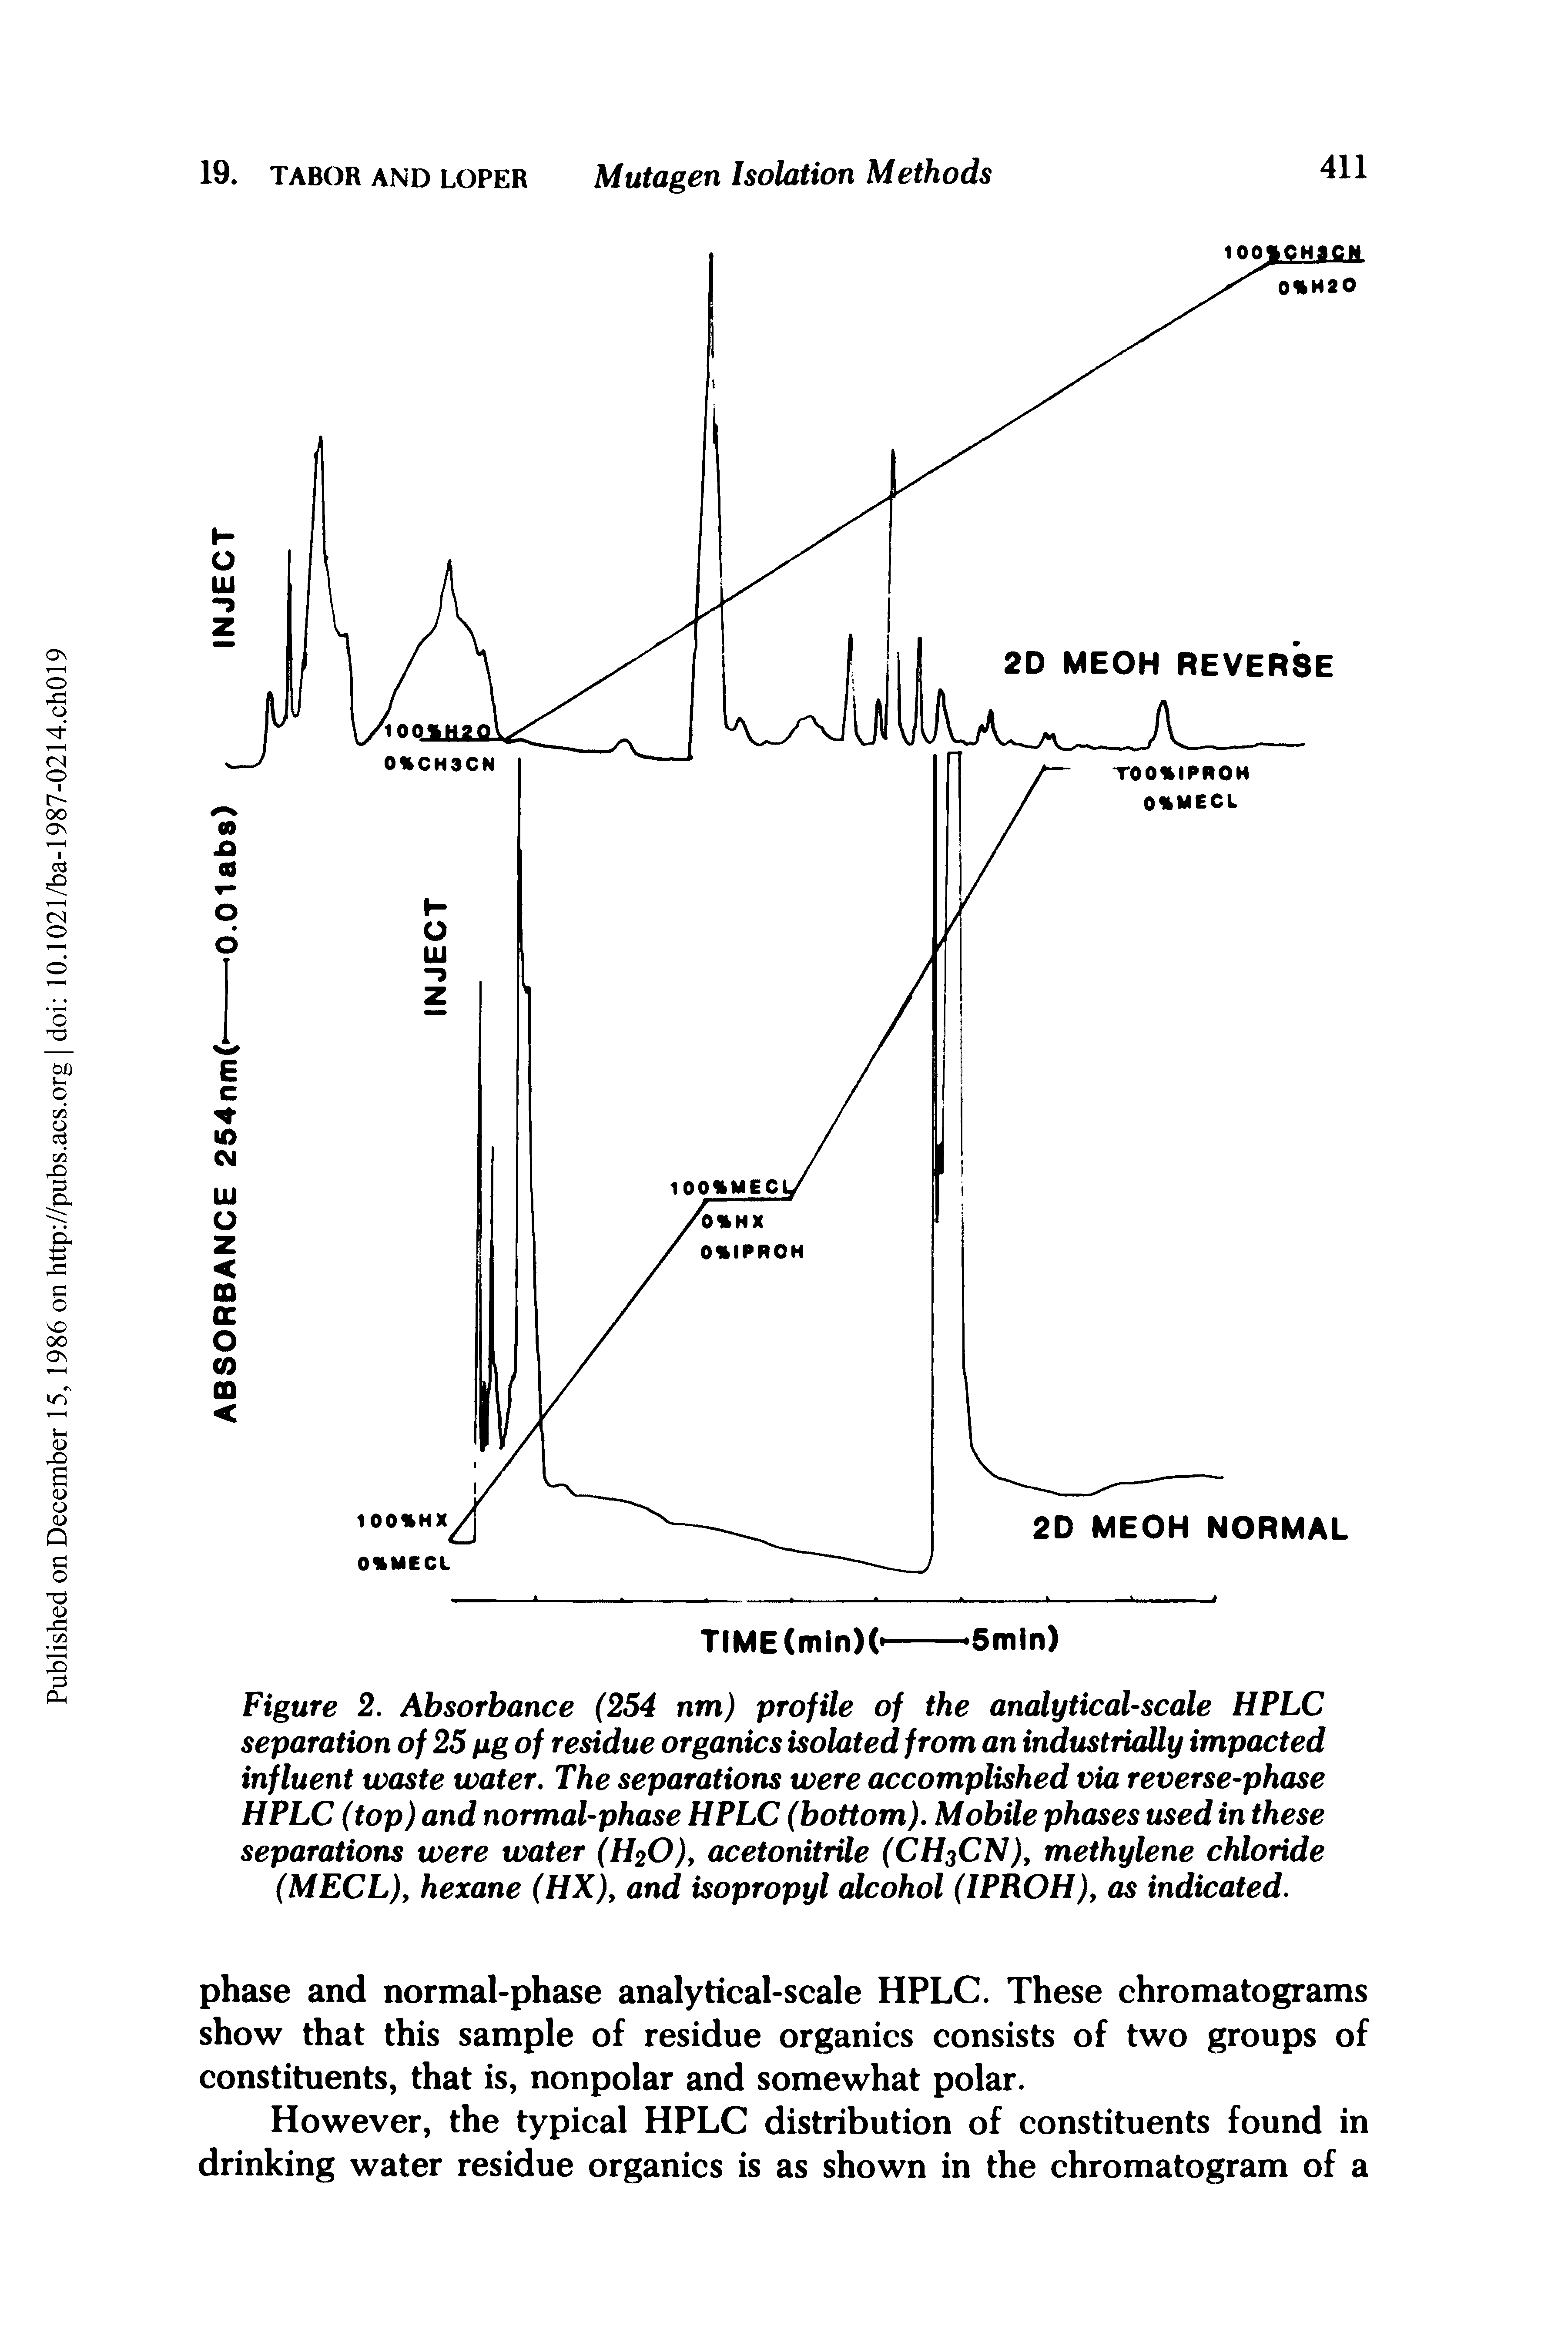 Figure 2. Absorbance (254 nm) profile of the analytical-scale HPLC separation of 25 pg of residue organics isolated from an industrially impacted influent waste water. The separations were accomplished via reverse-phase HPLC (top) and normal-phase HPLC (bottom). Mobile phases used in these separations were water (fyO), acetonitrile (CH3CN)> methylene chloride (MECL), hexane (HX), and isopropyl alcohol (IPROH), as indicated.